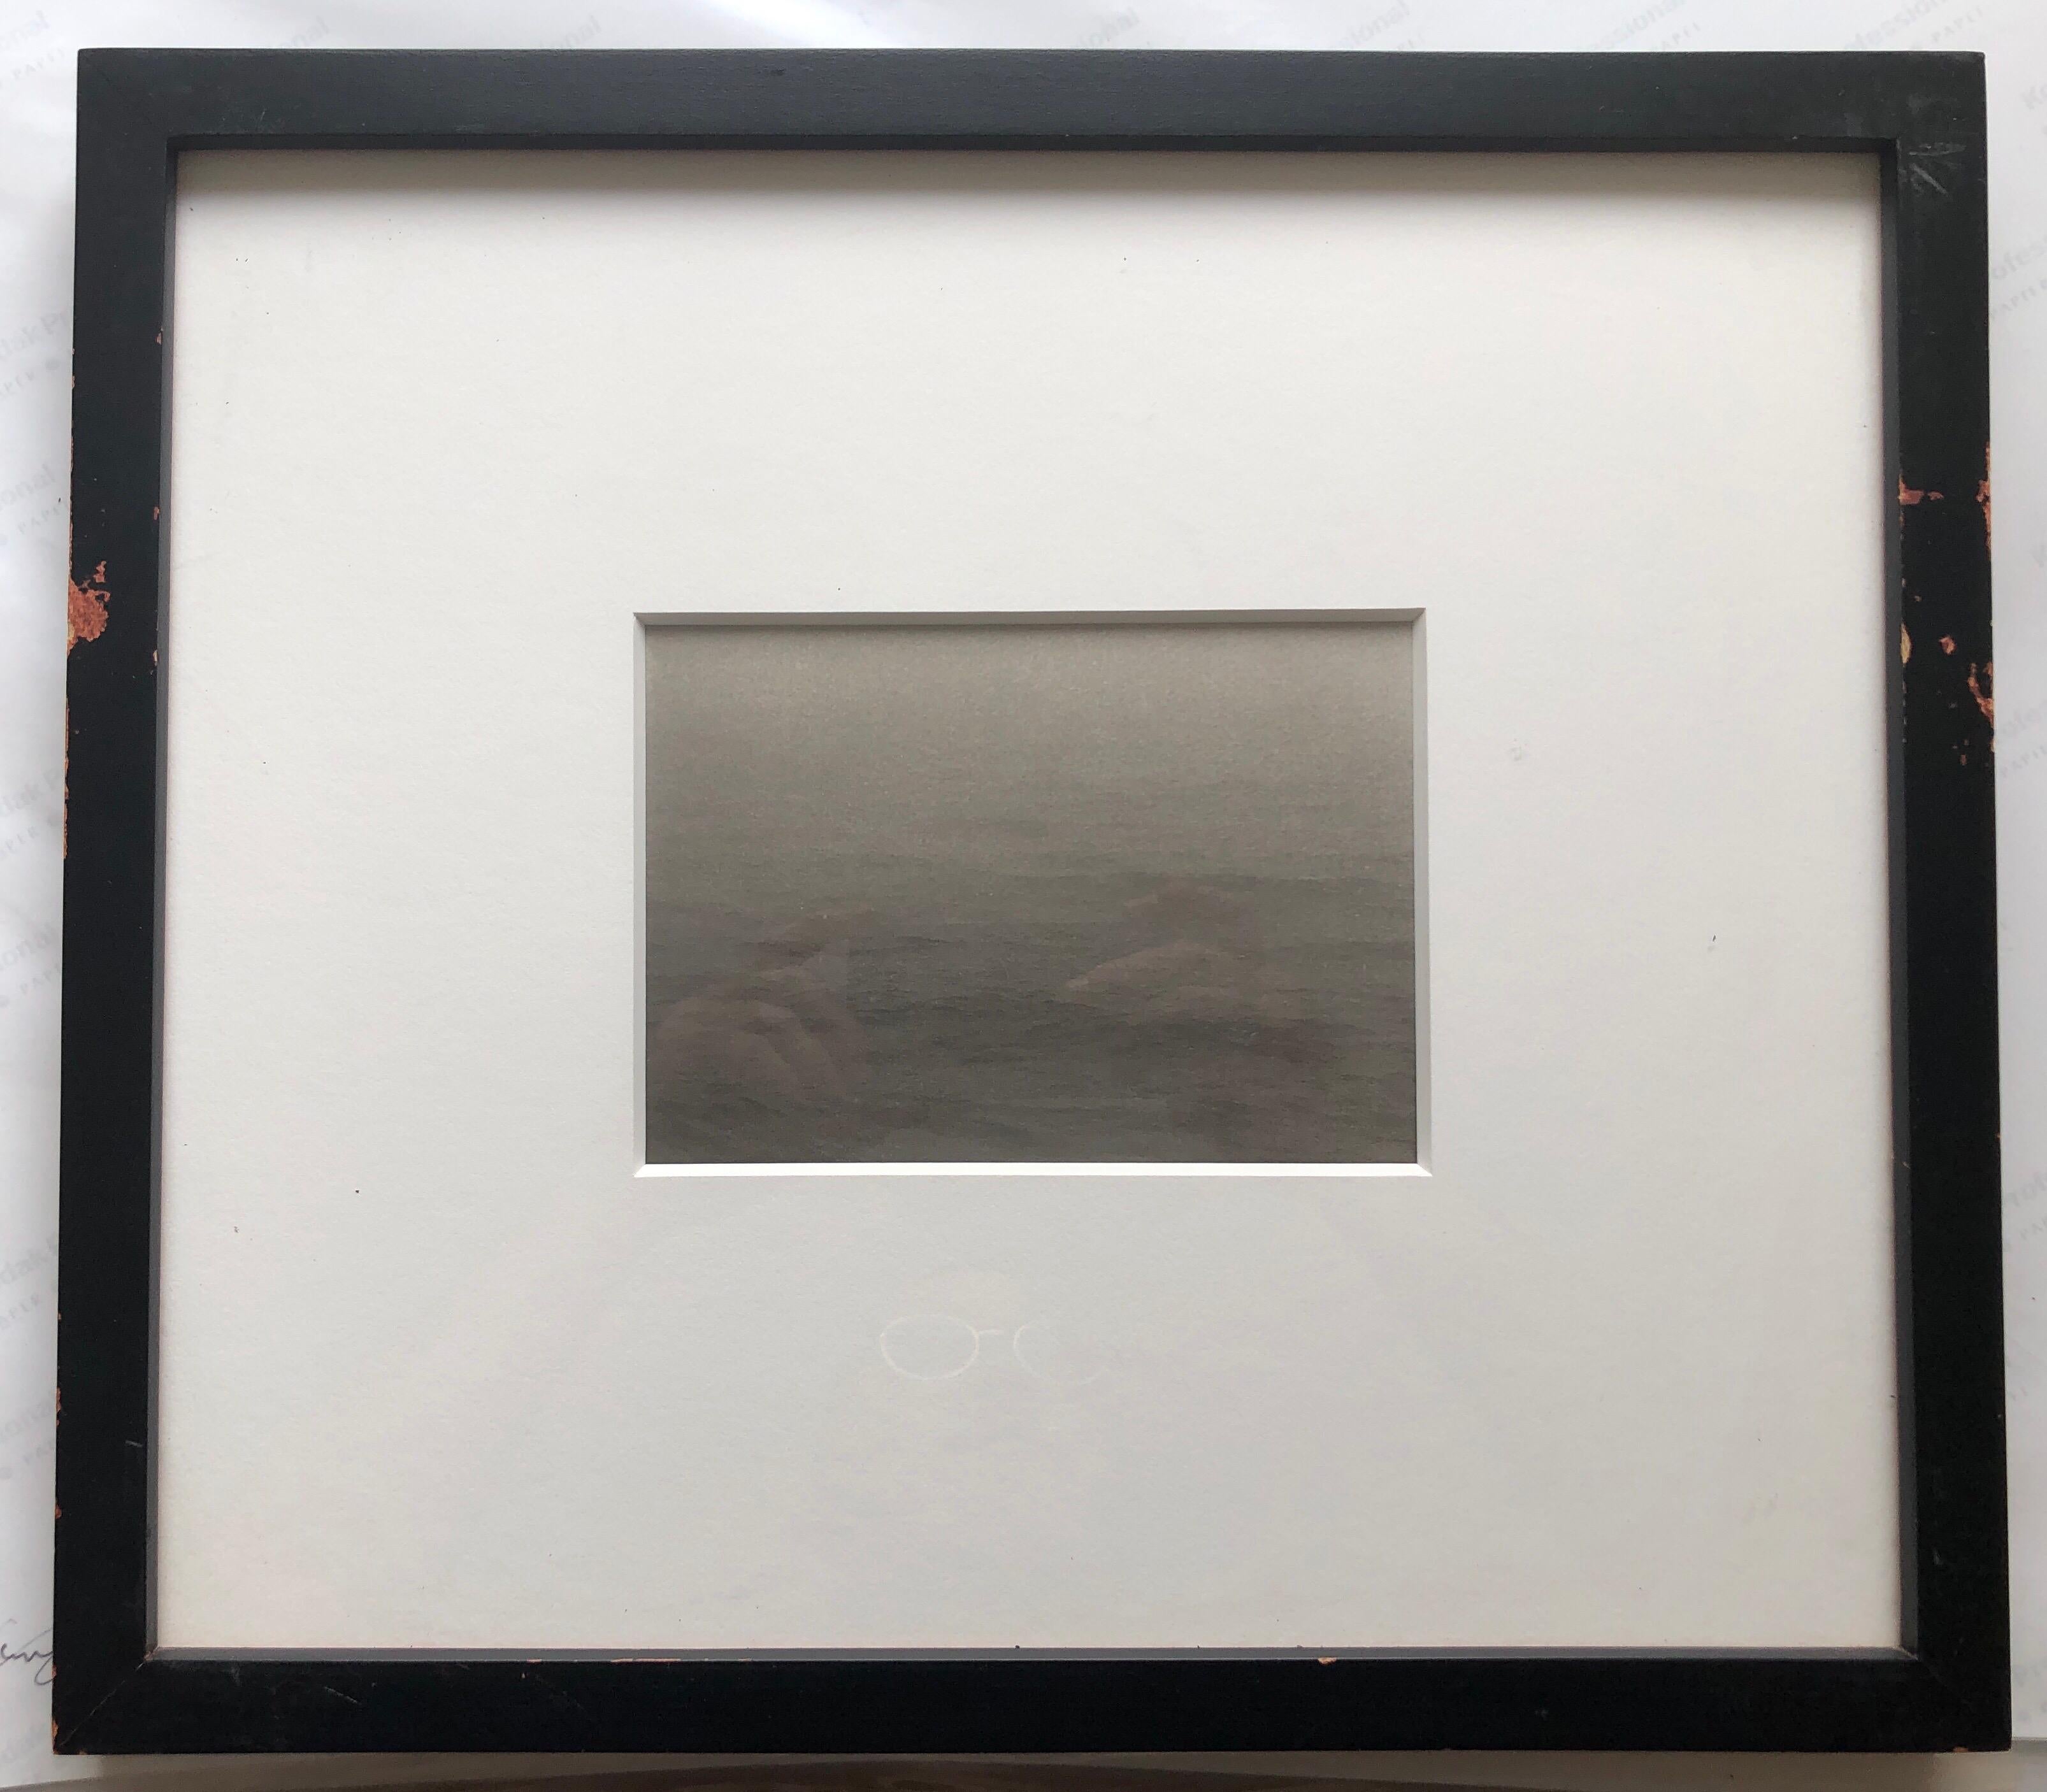 This is a Platinum Palladium print from one of her first ocean-based beach series, a body of platinum/palladium prints that focused on the water's surface. Later, she transferred her attention to architectural remnants of human habitation near the